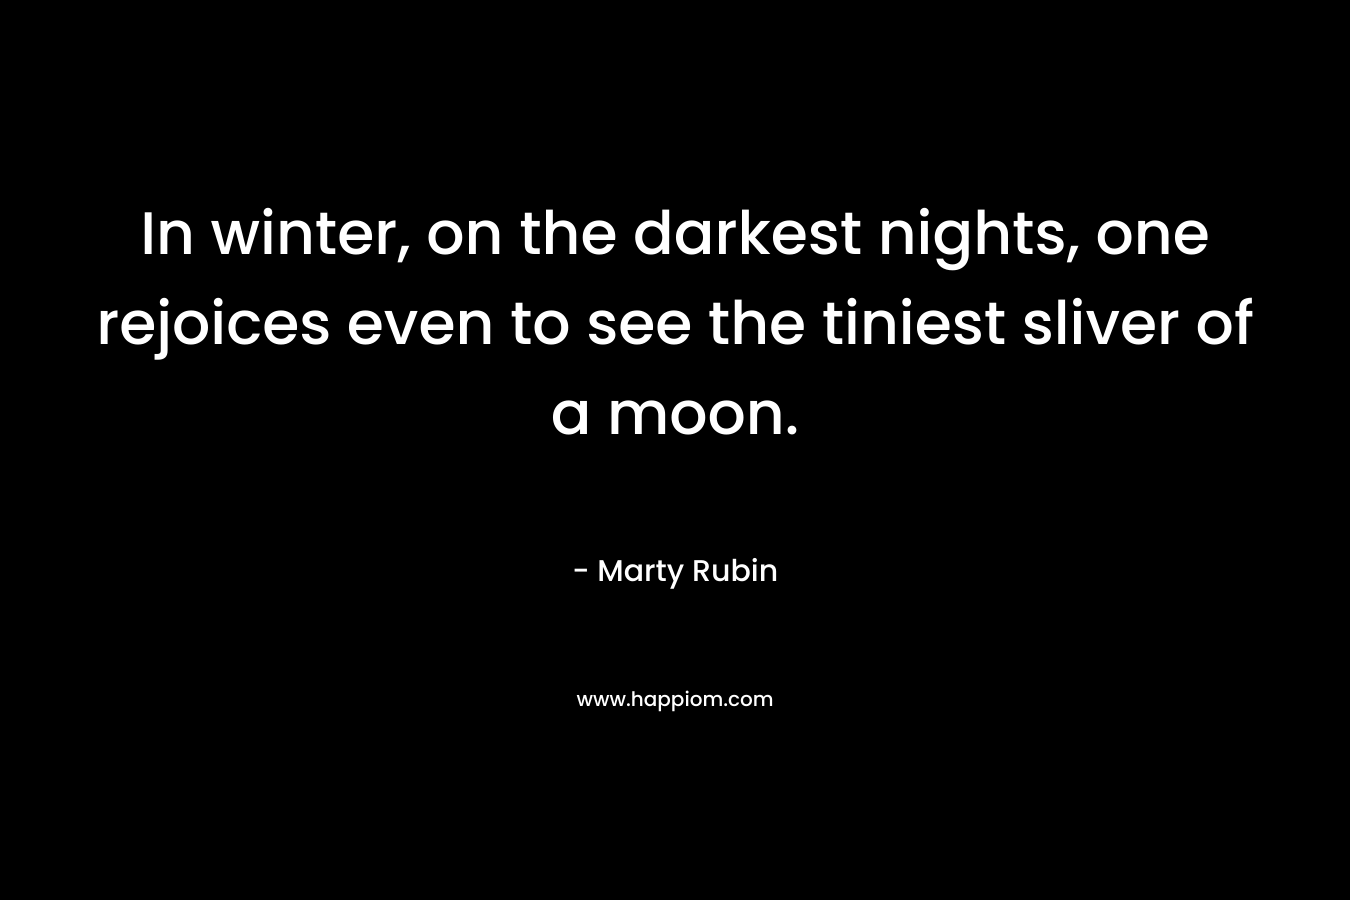 In winter, on the darkest nights, one rejoices even to see the tiniest sliver of a moon.